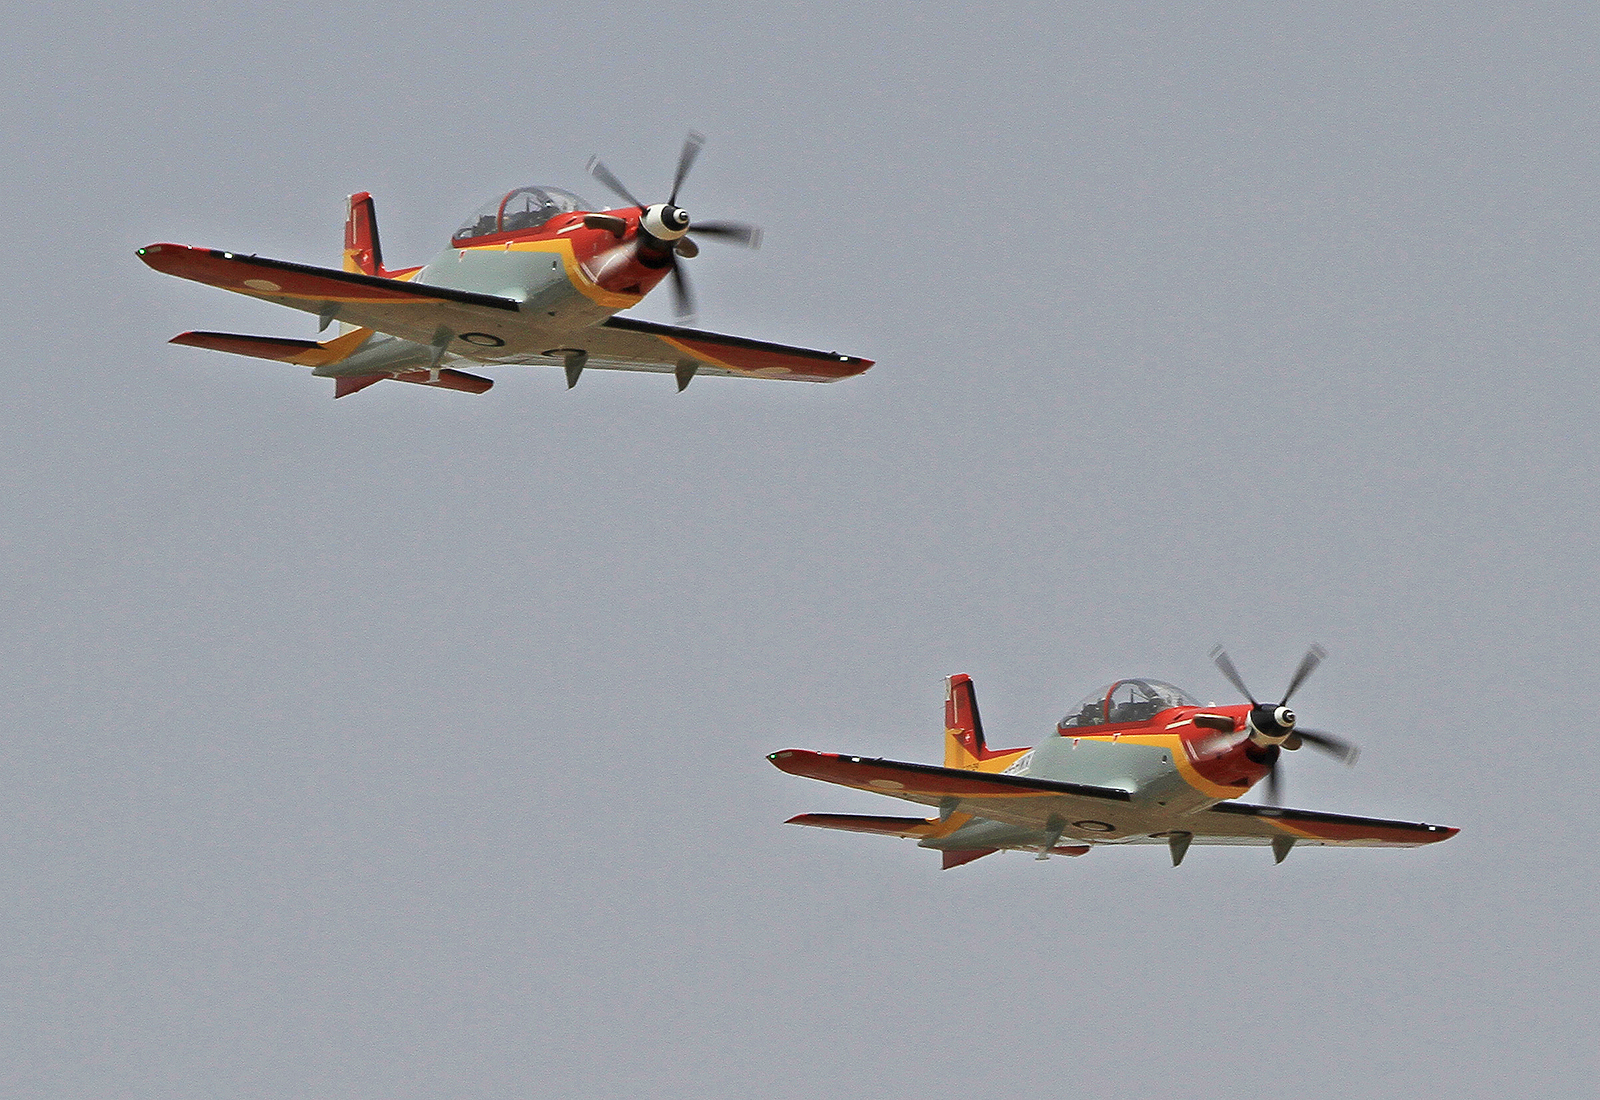 Spanish Air Force (Ejército del Aire) received  it's  last  two  Pilatus PC-21  turboprop  trainers.